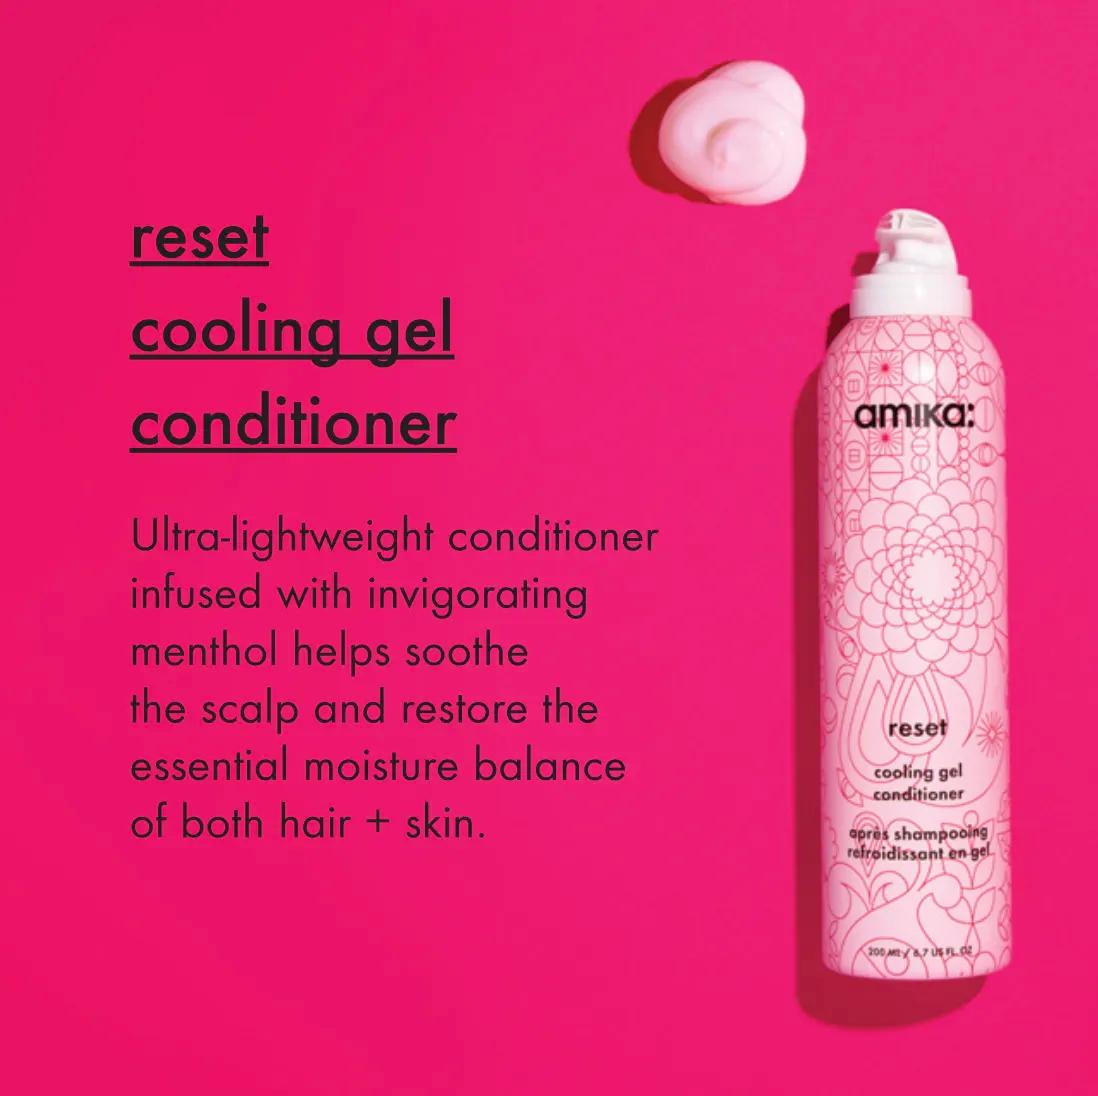 reset cooling gel conditioner: ultra-lightweight conditioner infused with invigorating menthol helps soothe the scalp and restore the essential moisture balance of both hair + skin.